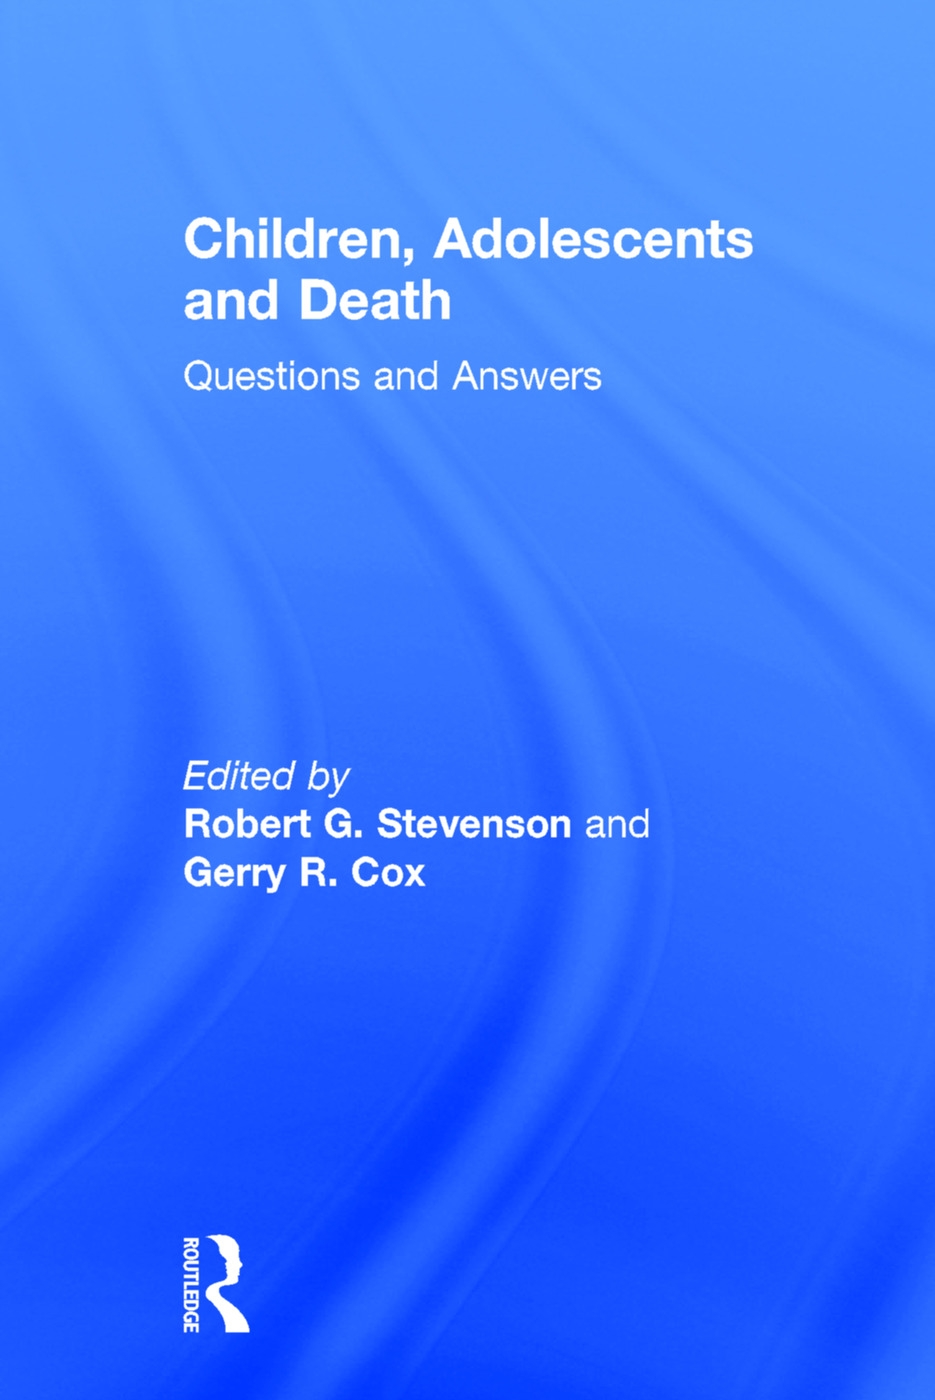 Children, Adolescents, and Death: Questions and Answers